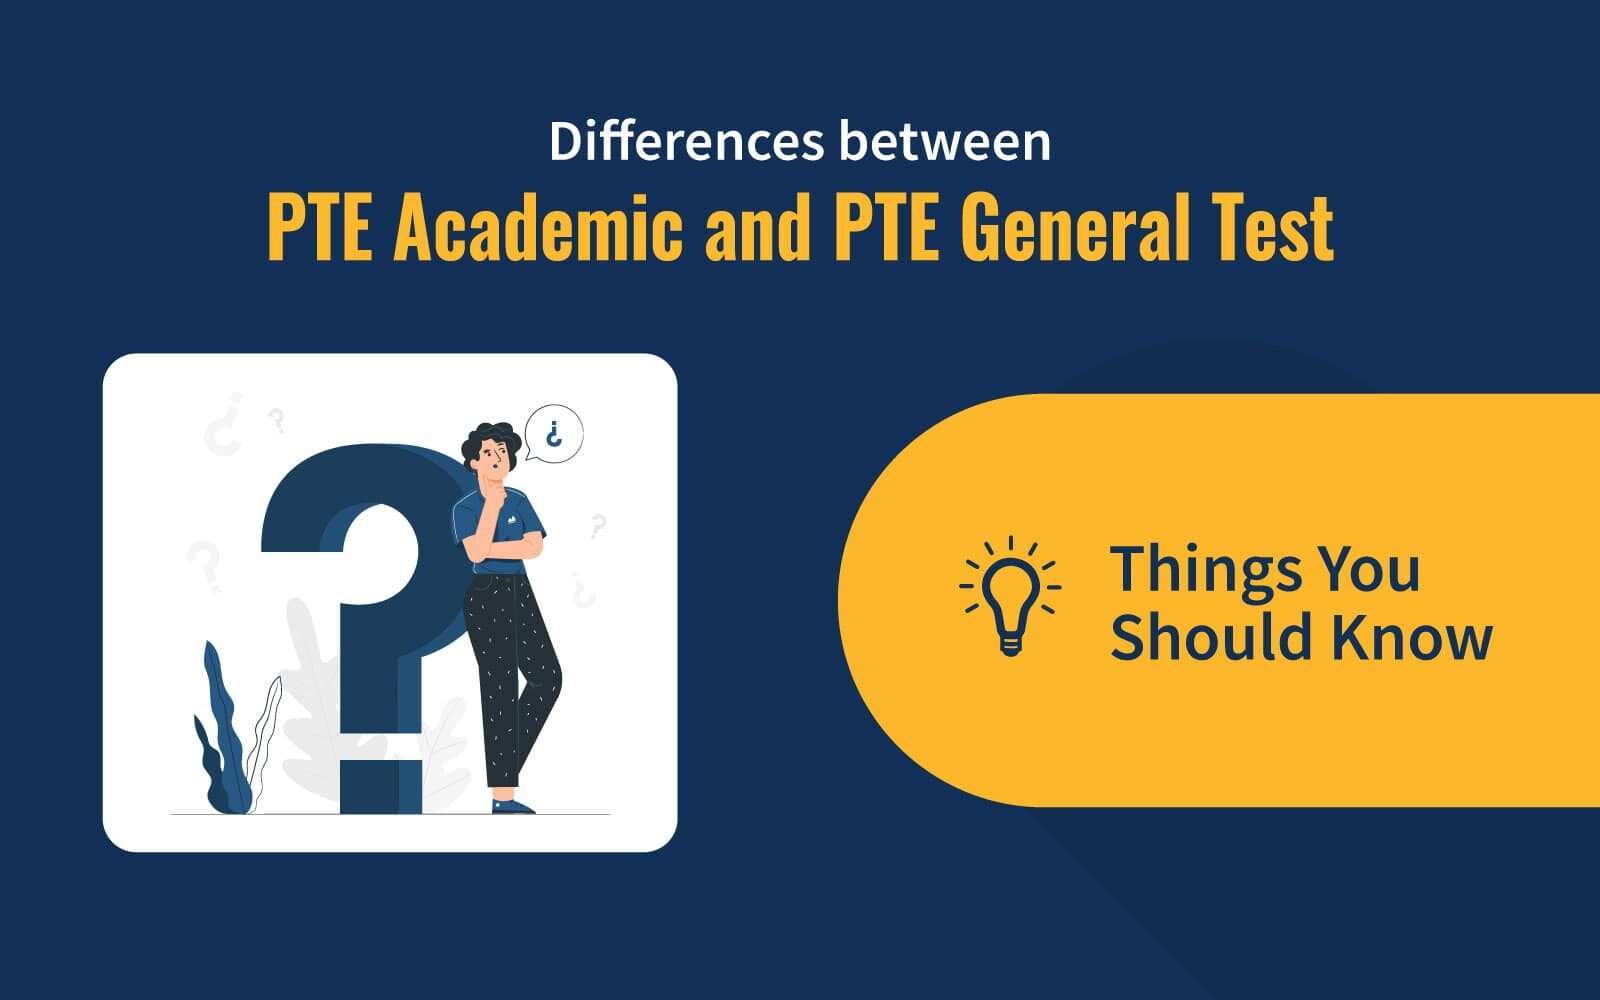 Differences between PTE Academic and PTE General Test